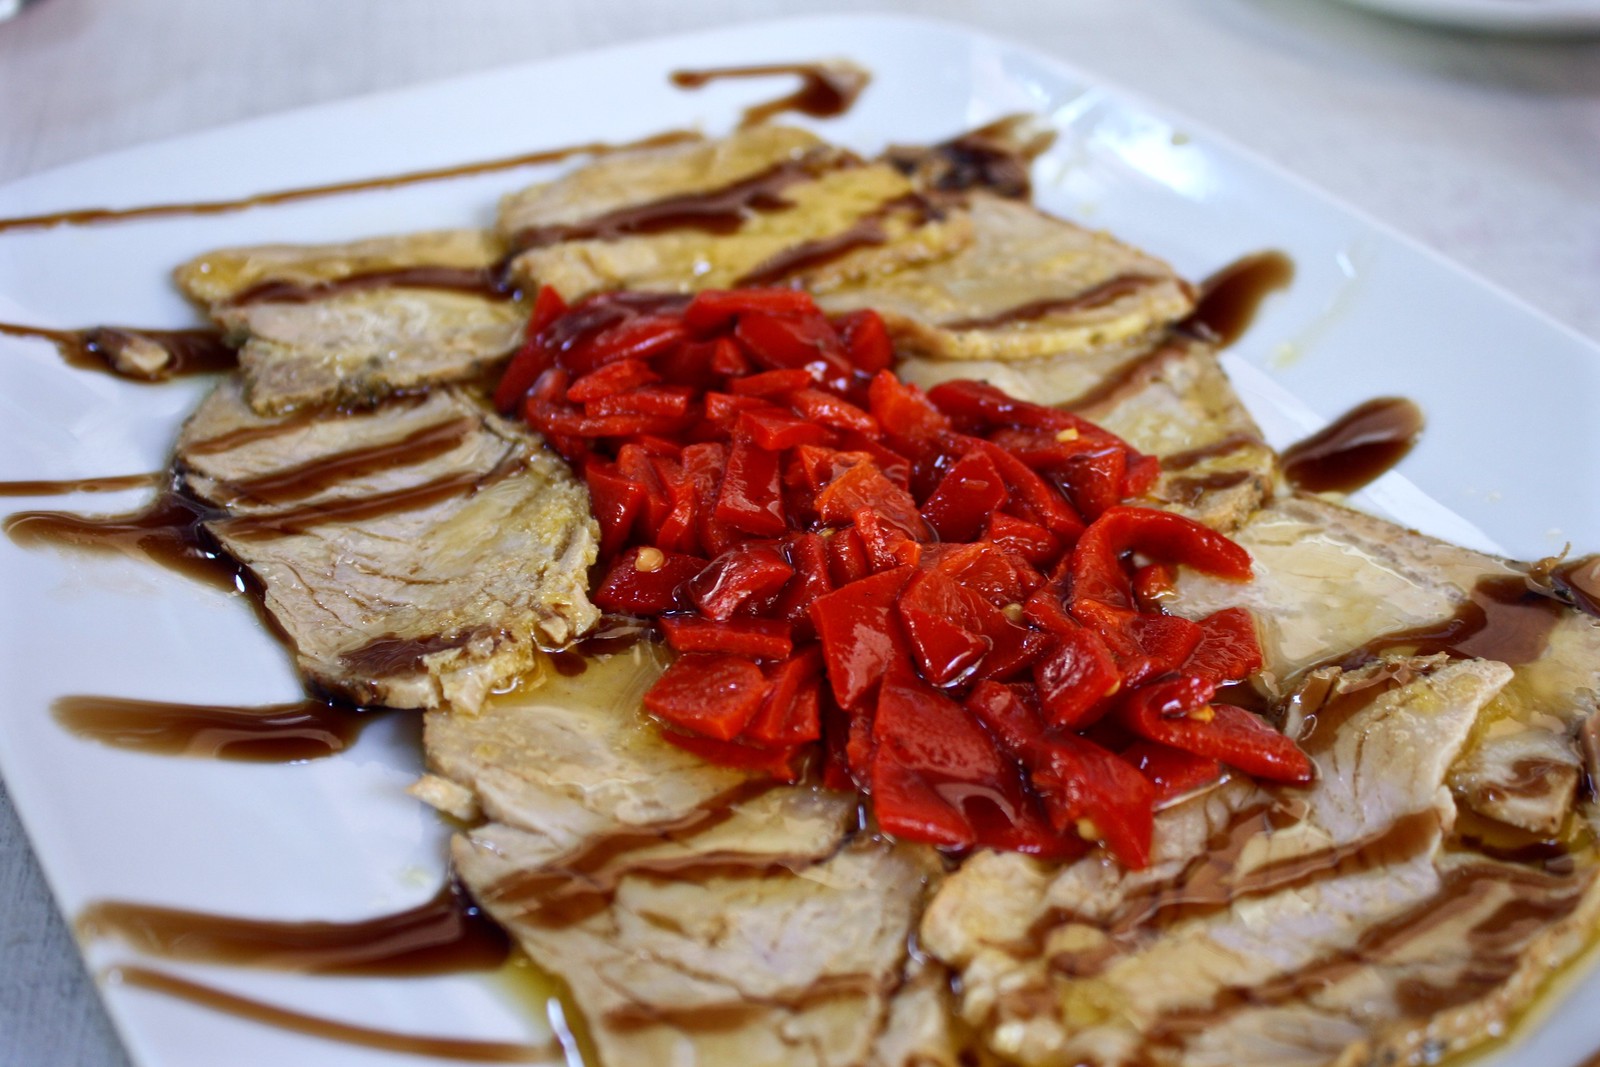 Pork loin with roasted red peppers in Jaén, Spain